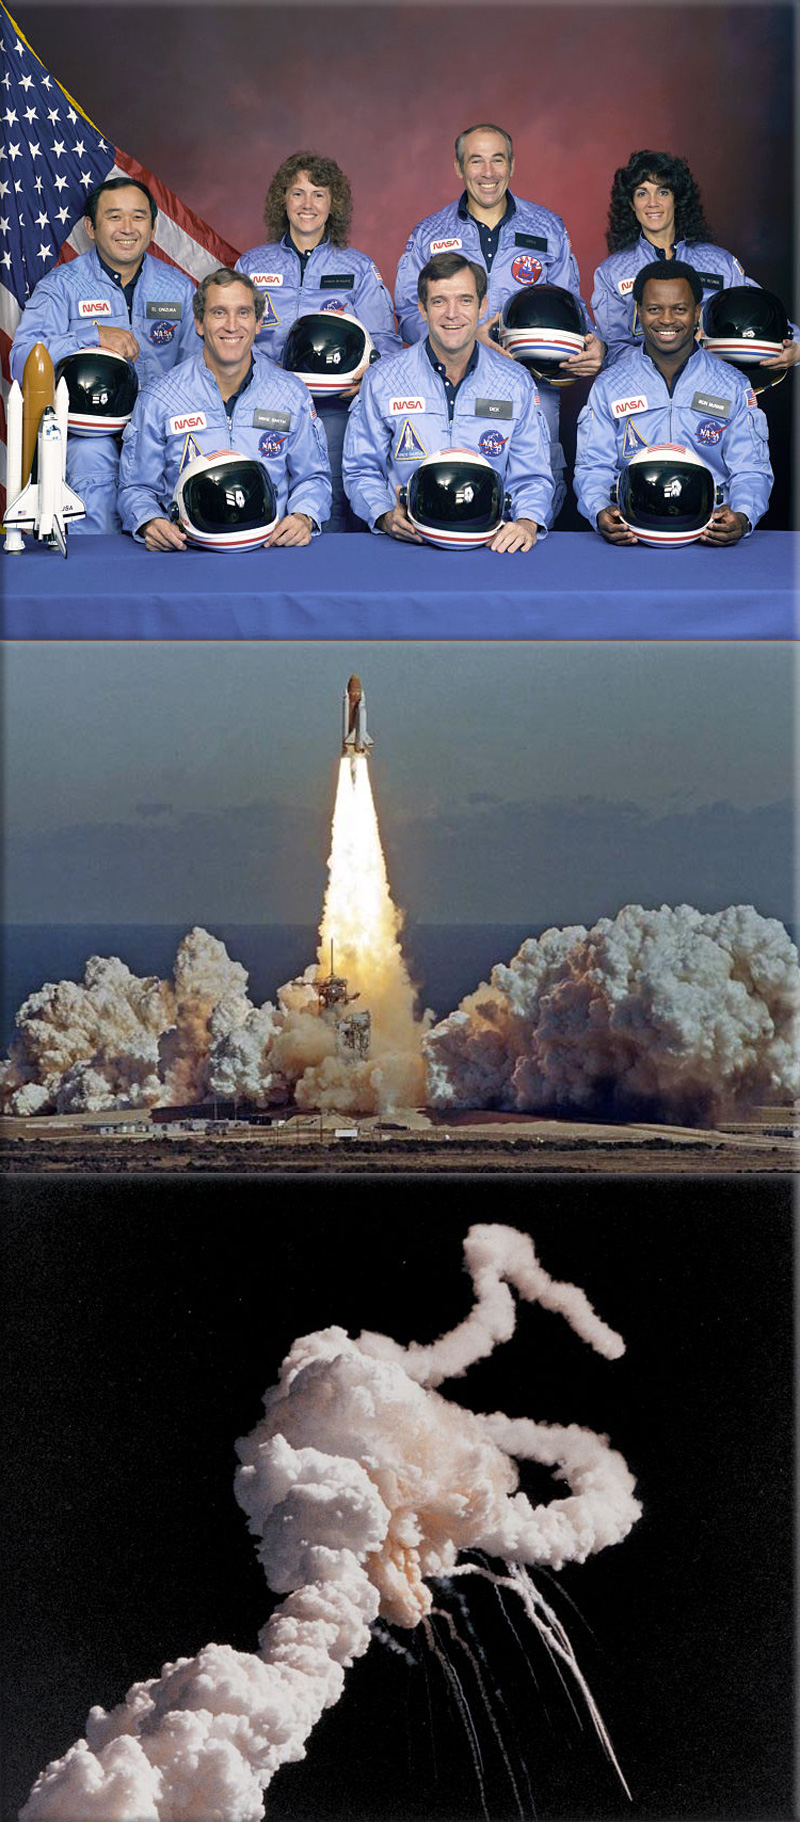 The Space Shuttle Challenger disaster occurred on January 28, 1986, when Space Shuttle Challenger (mission STS-51-L) broke apart 73 seconds into its flight, leading to the deaths of its seven crew members (The spacecraft disintegrated over the Atlantic Ocean, off the coast of central Florida at 11:38 EST (16:38 UTC))